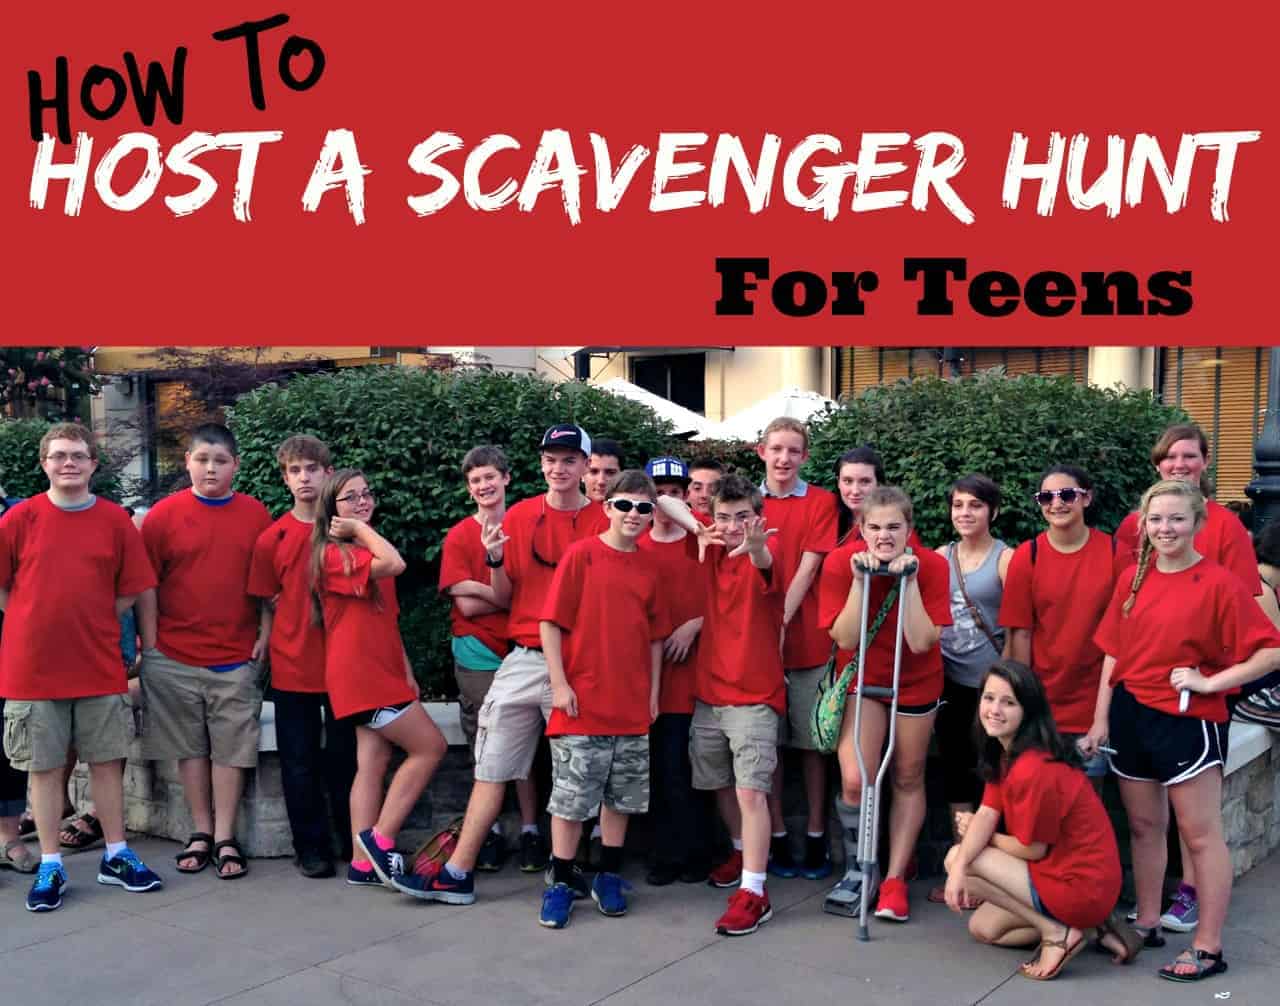 How to Plan A Scavenger Hunt For Teens